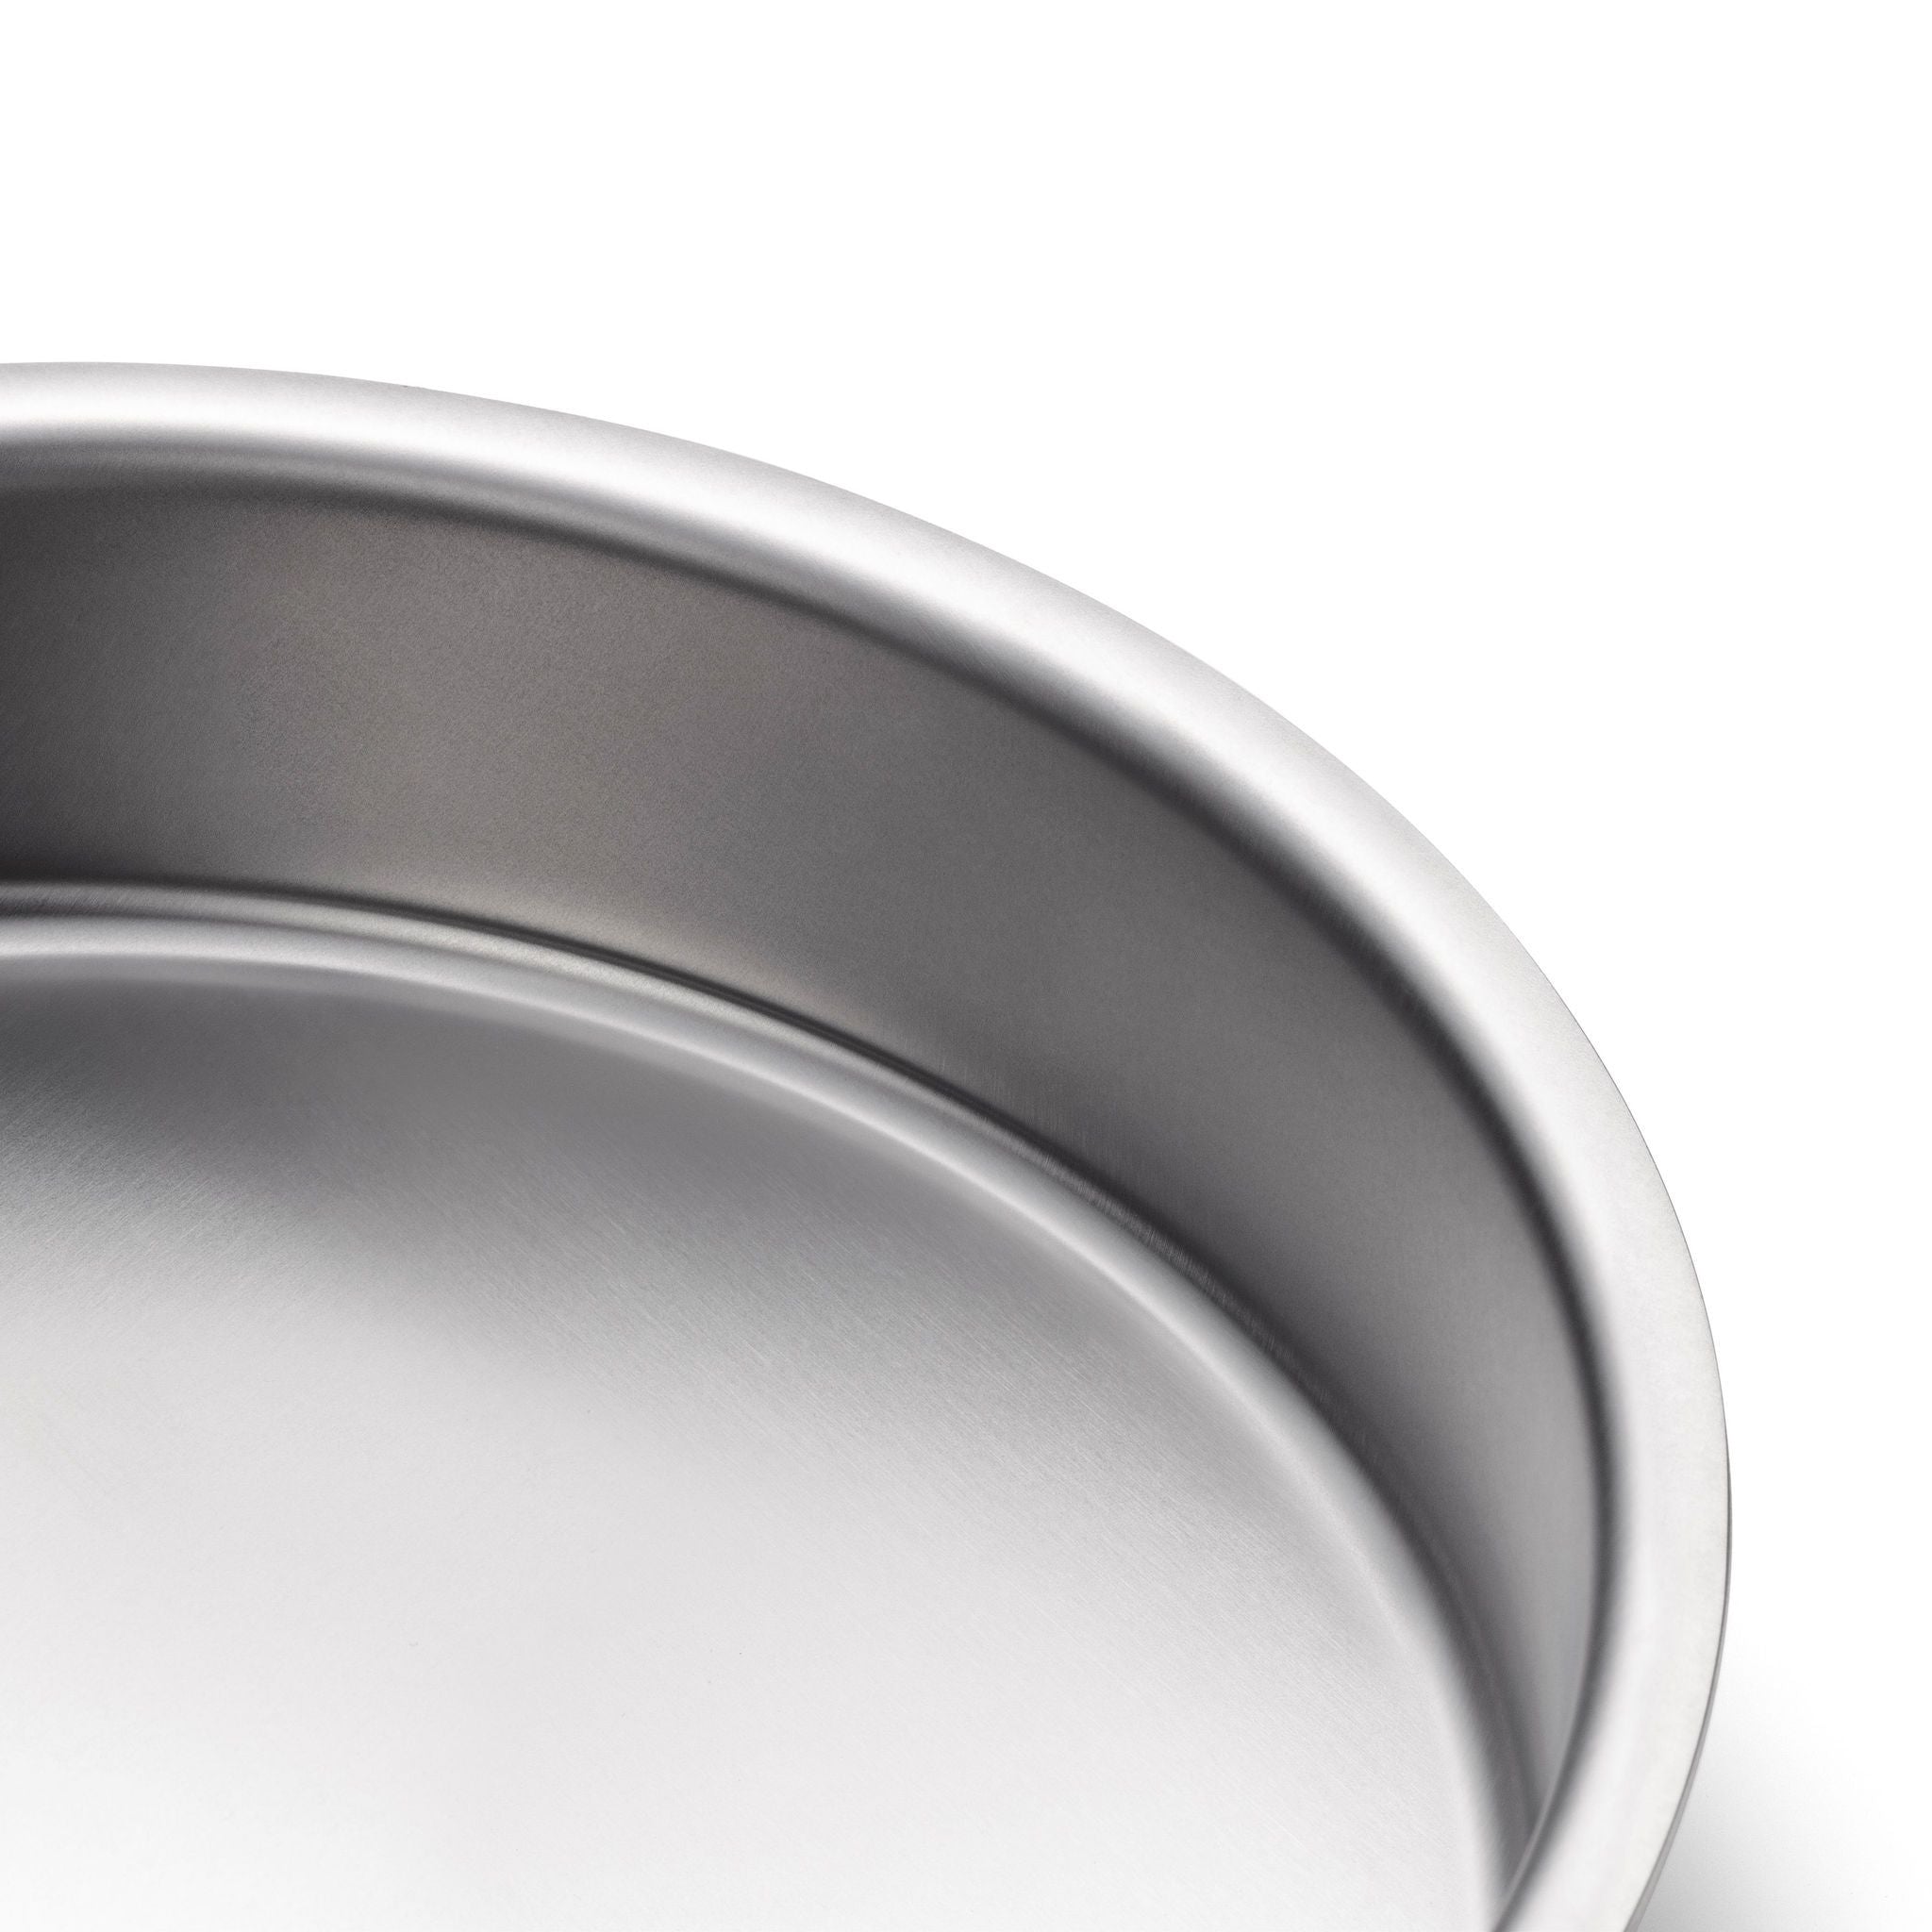 Stainless Steel 9 Inch Round Cake Pan